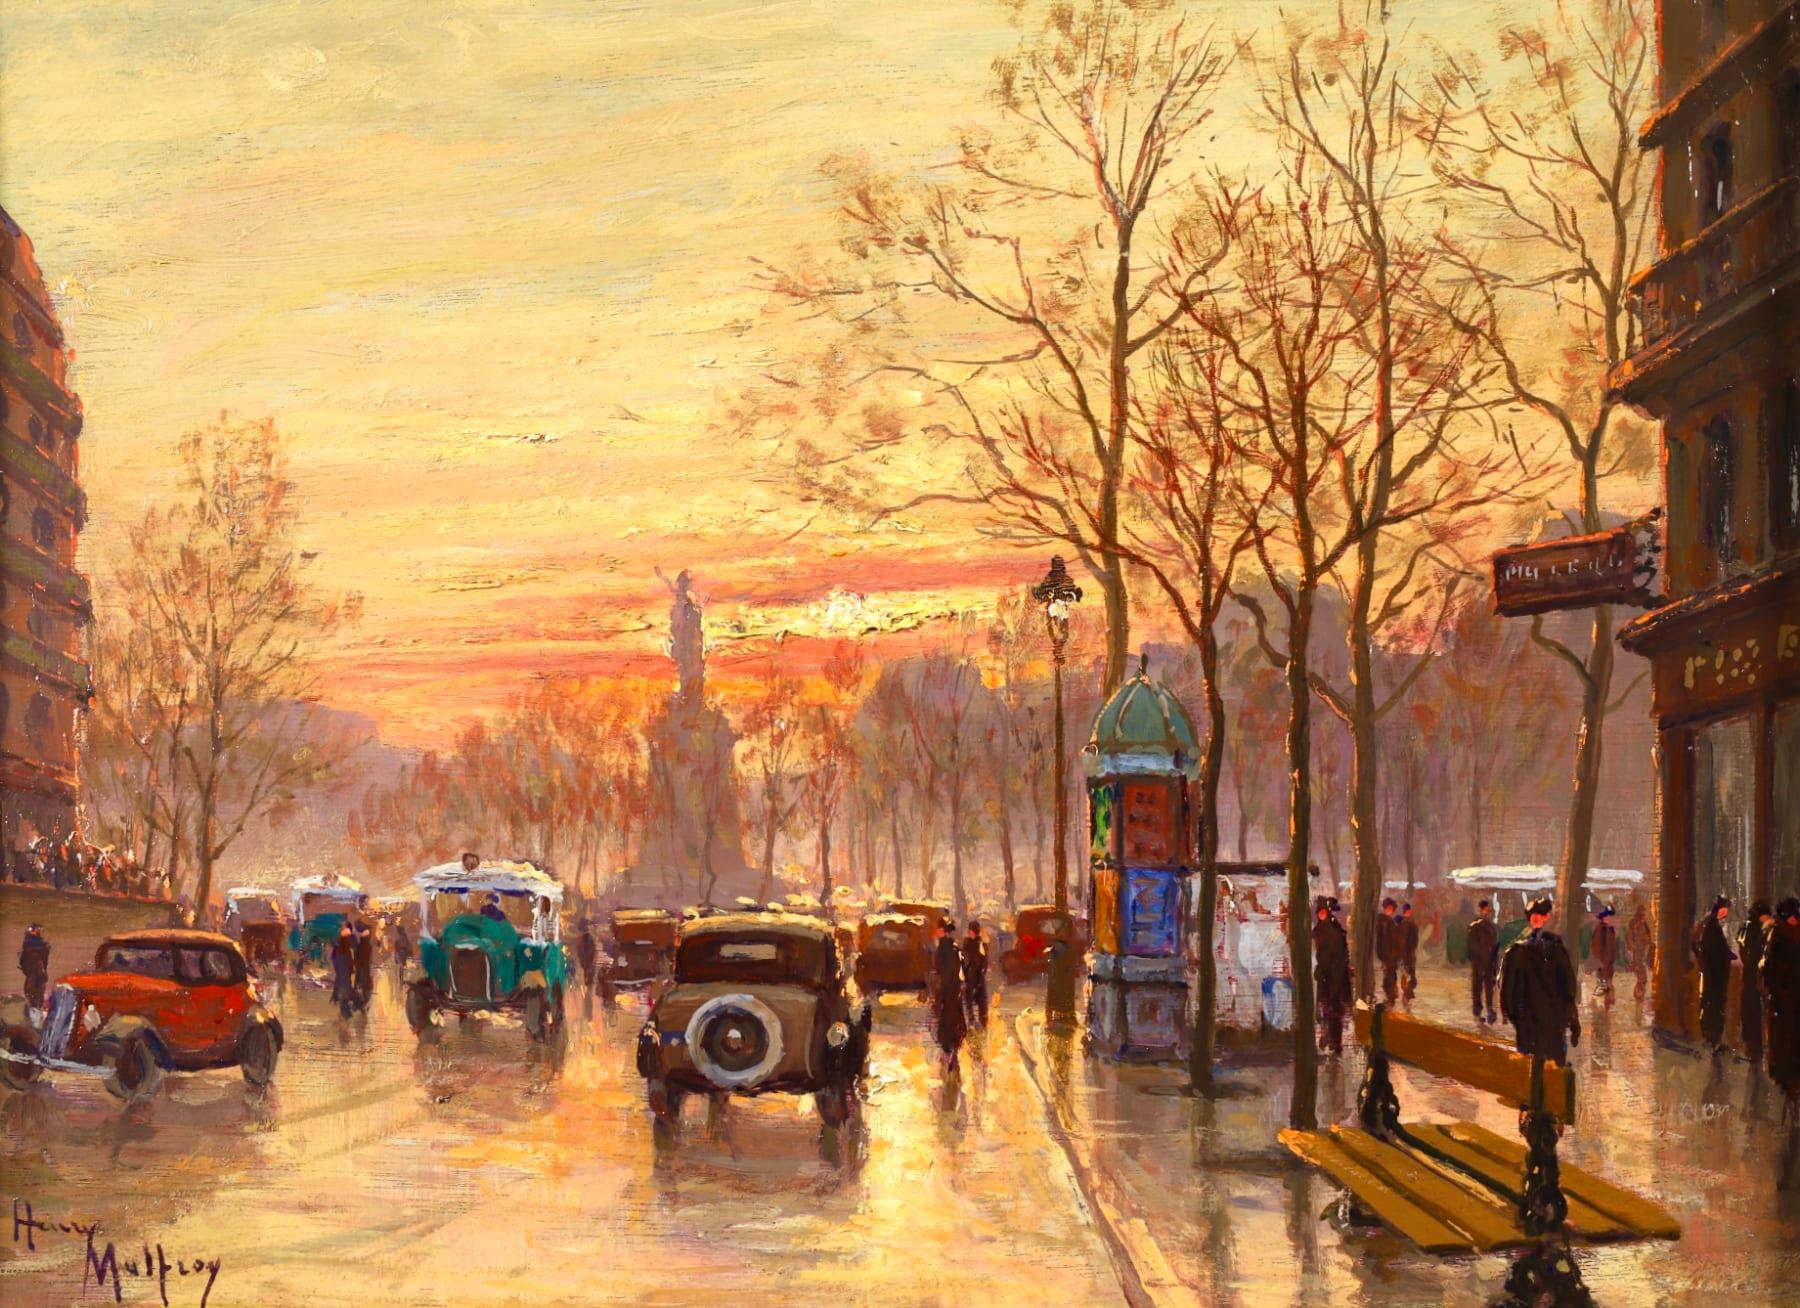 A beautiful oil on canvas circa 1930 by French Post Impressionist painter Henry Malfroy. The piece depicts a bustling street scene in the Place de la Republique square in Paris, France with the sun setting behind the bare autumn trees and the statue